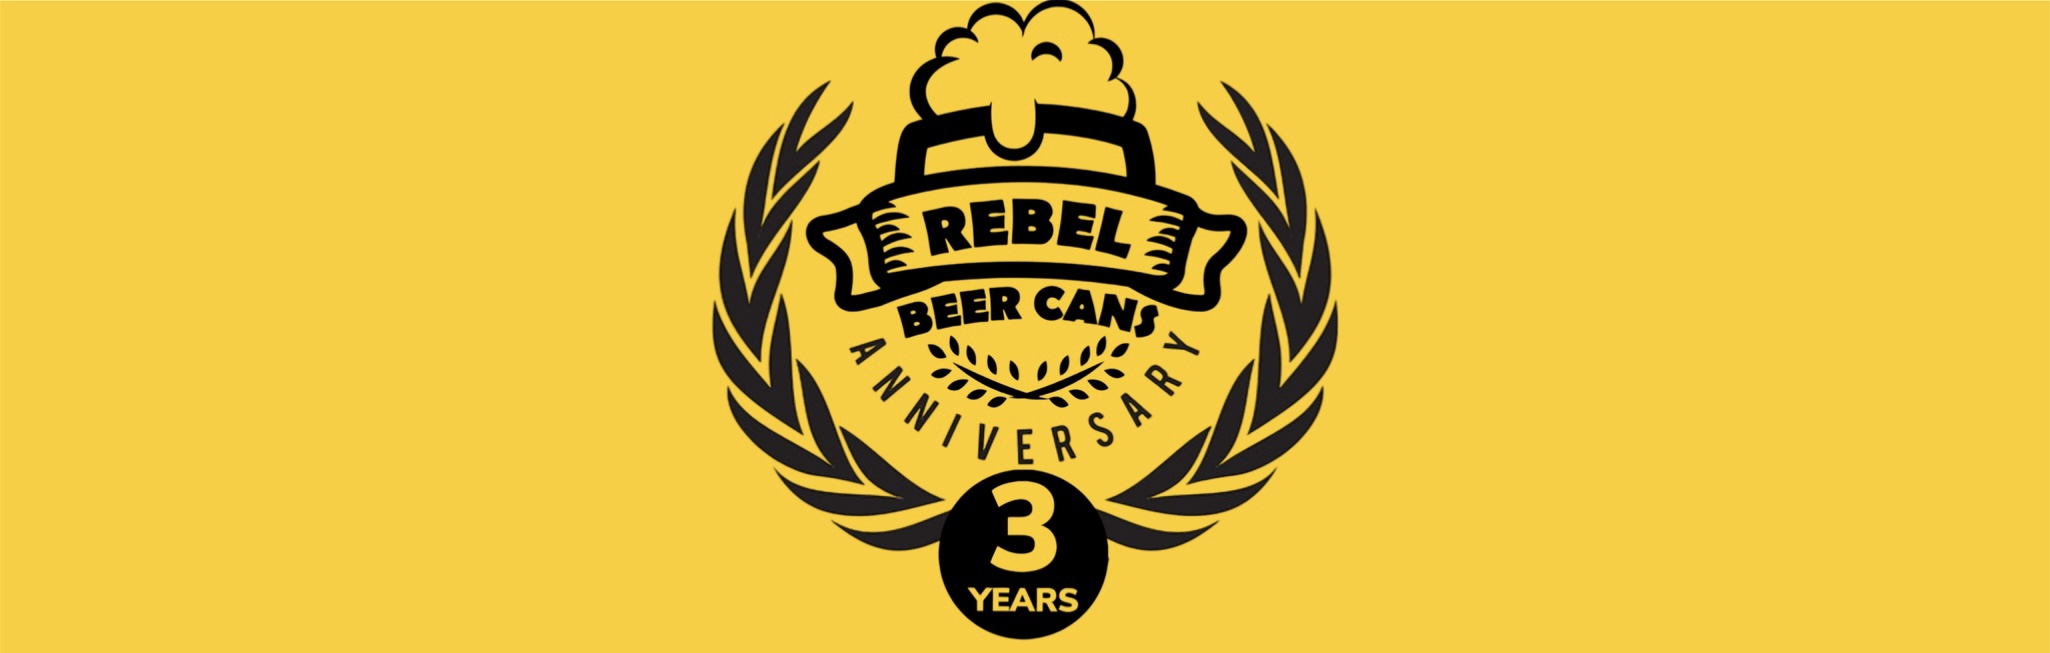 3 Years Rebelbeercans!